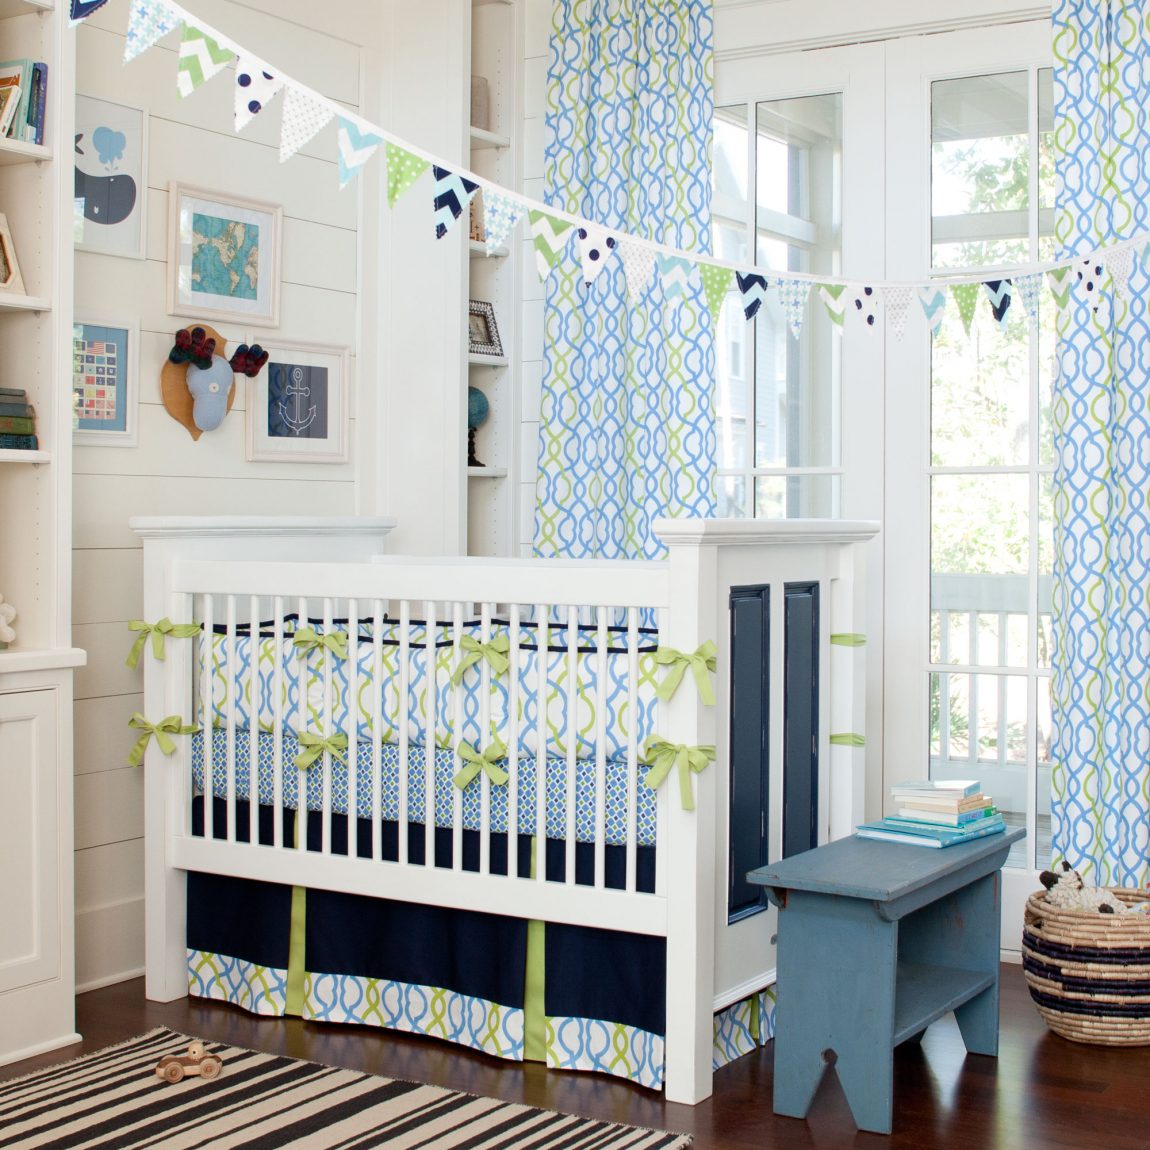 Blue Themed With Trendy Blue Themed Nursery Idea With Baby Boy Crib Bedding Decorated With Patterned Banners And Curtain Kitchens Enchanting Baby Boy Crib Bedding Applied In Colorful Baby Room